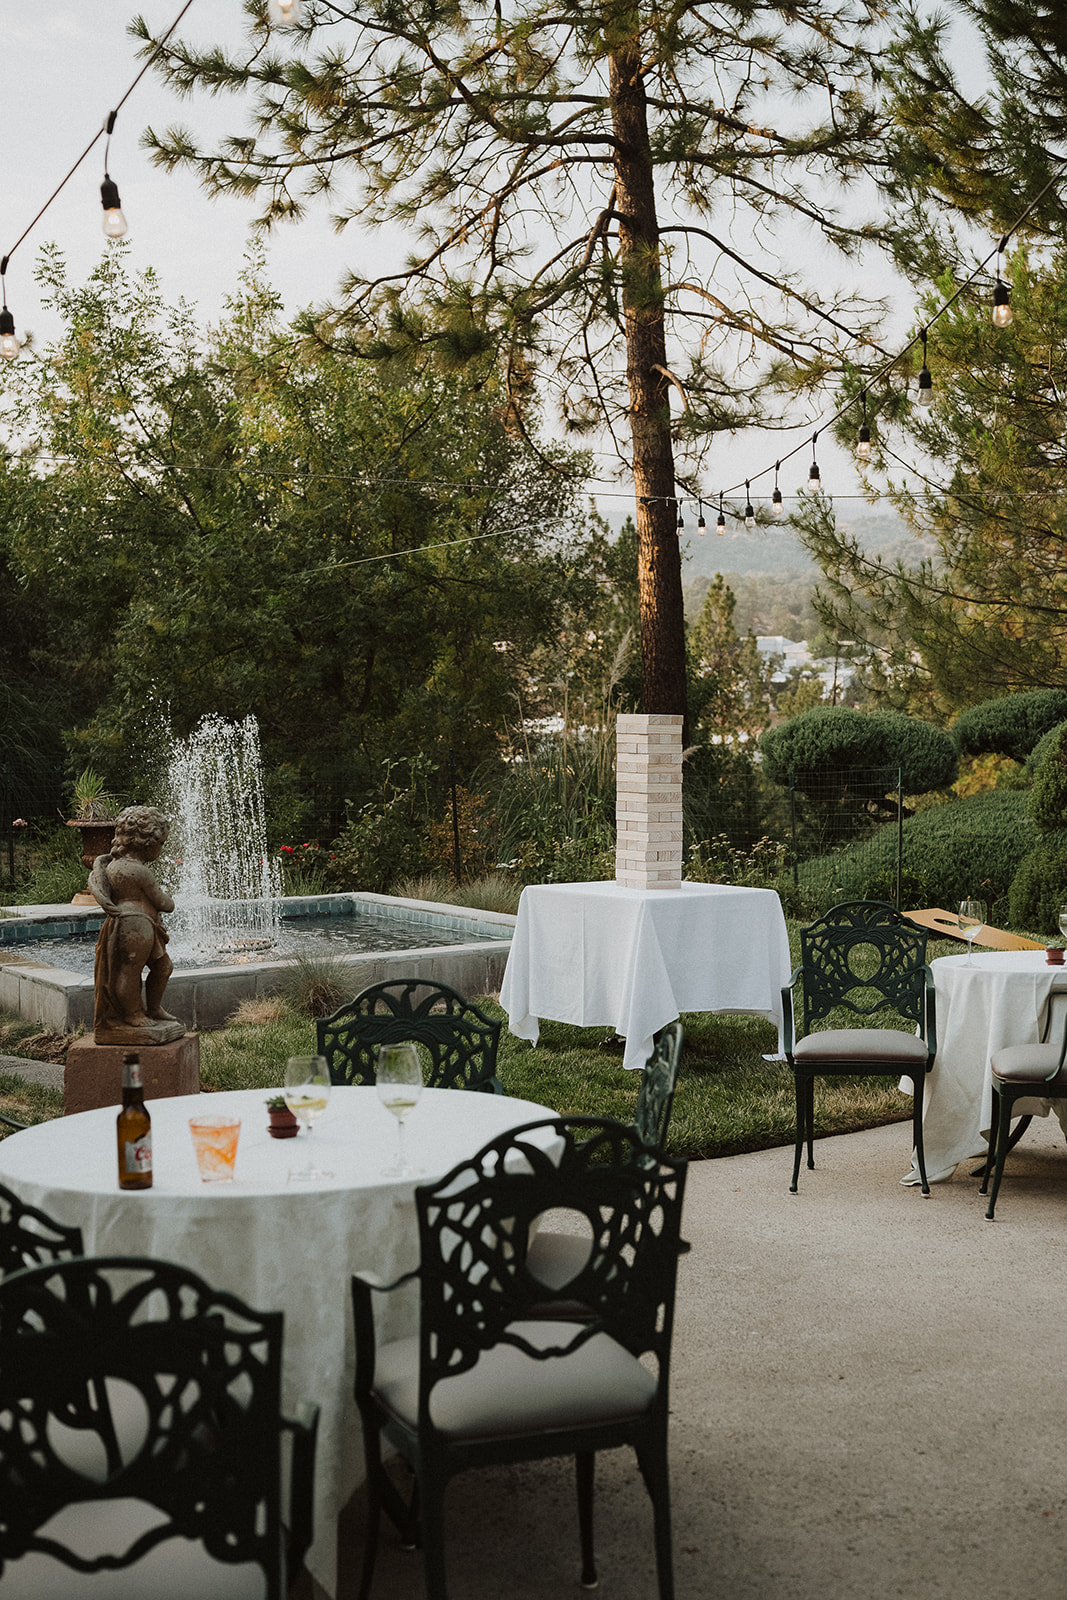 A wedding at Château du Sureau in Oakhurst, CA. Just a short drive from Yosemite National Park